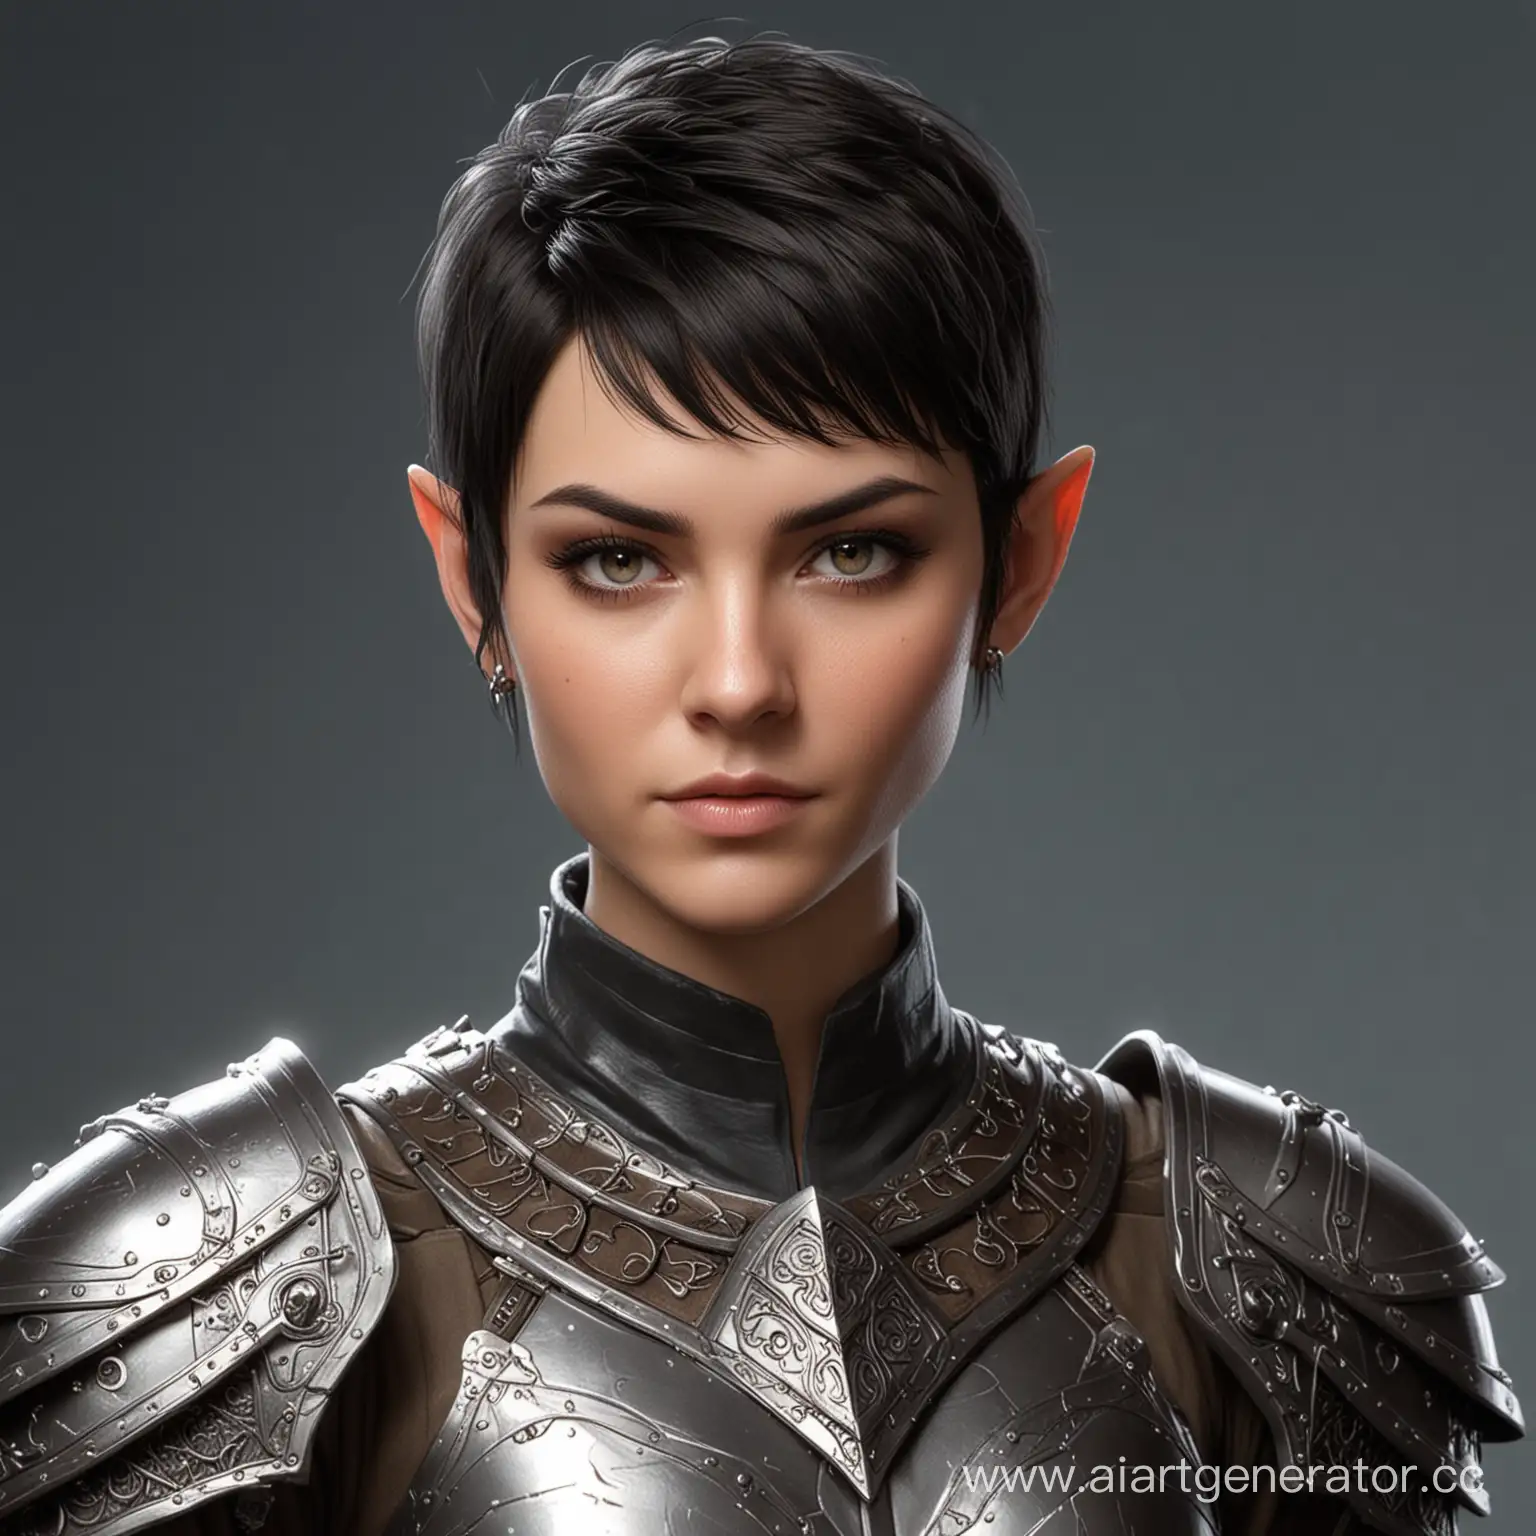 Elven-Girl-Inventor-in-Scale-Armor-Dark-Hair-and-Short-Haircut